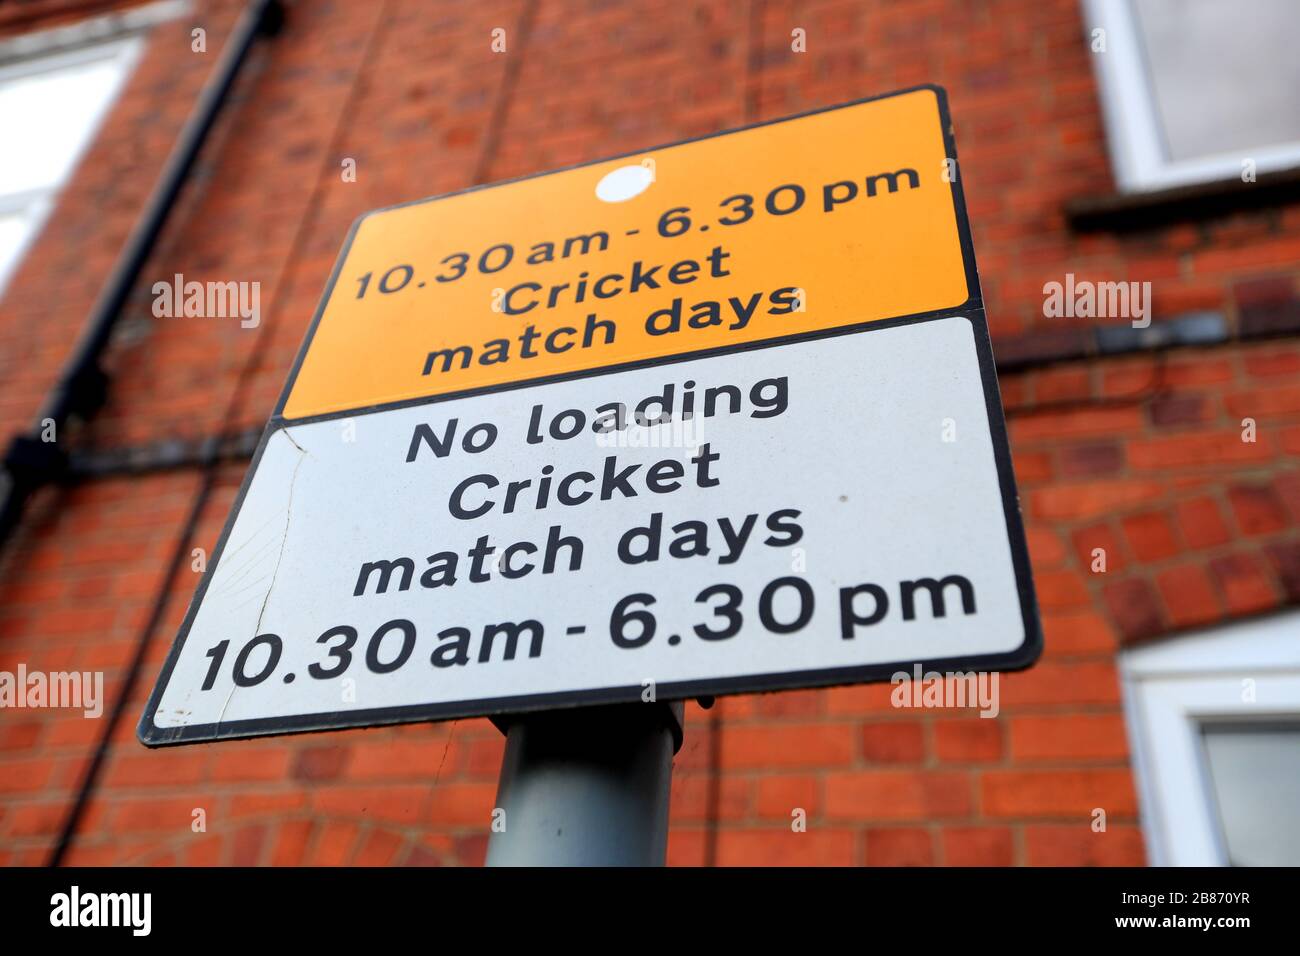 A general view of a sign outside the Fischer County Ground, home of the Leicestershire County Cricket Club after it was announced that The England and Wales Cricket Board (ECB) has recommended all forms of recreational cricket be suspended indefinitely because of coronavirus. Stock Photo